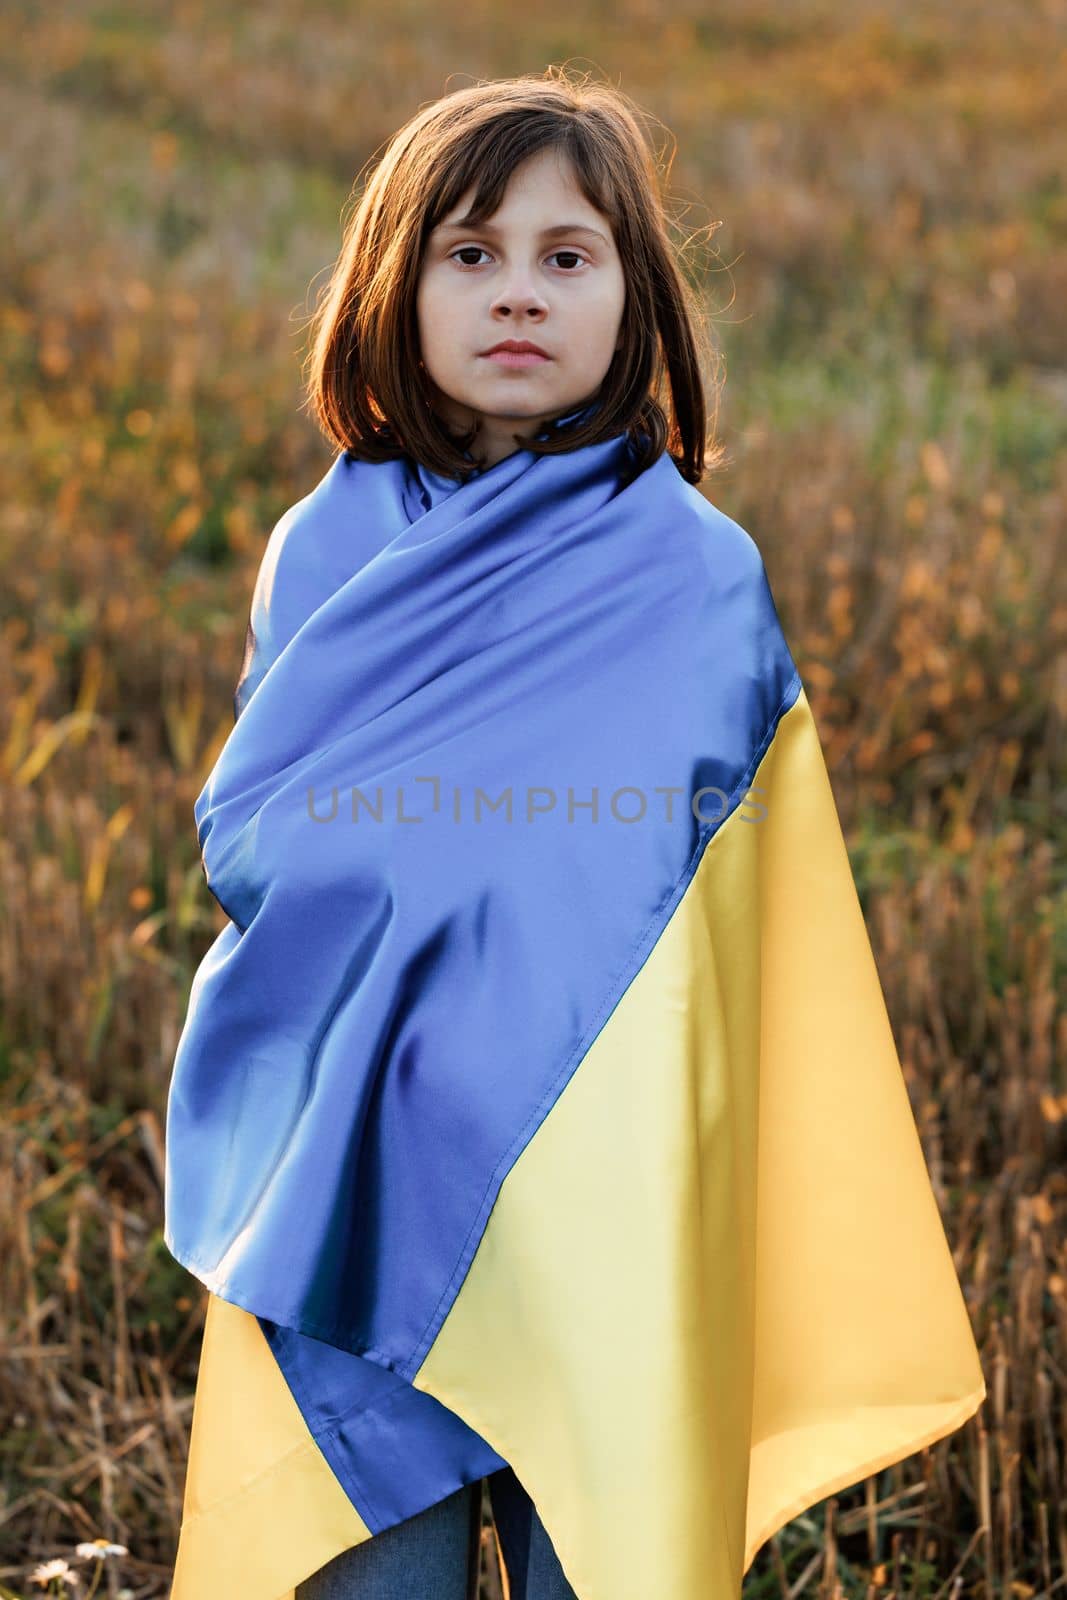 Portrait of Sad Ukrainian girl stands with a flag of Ukraine in the middle of field against a sunset sky. 8 years old girl holding the flag of Ukraine. War in Ukraine. Support for Ukraine by uflypro